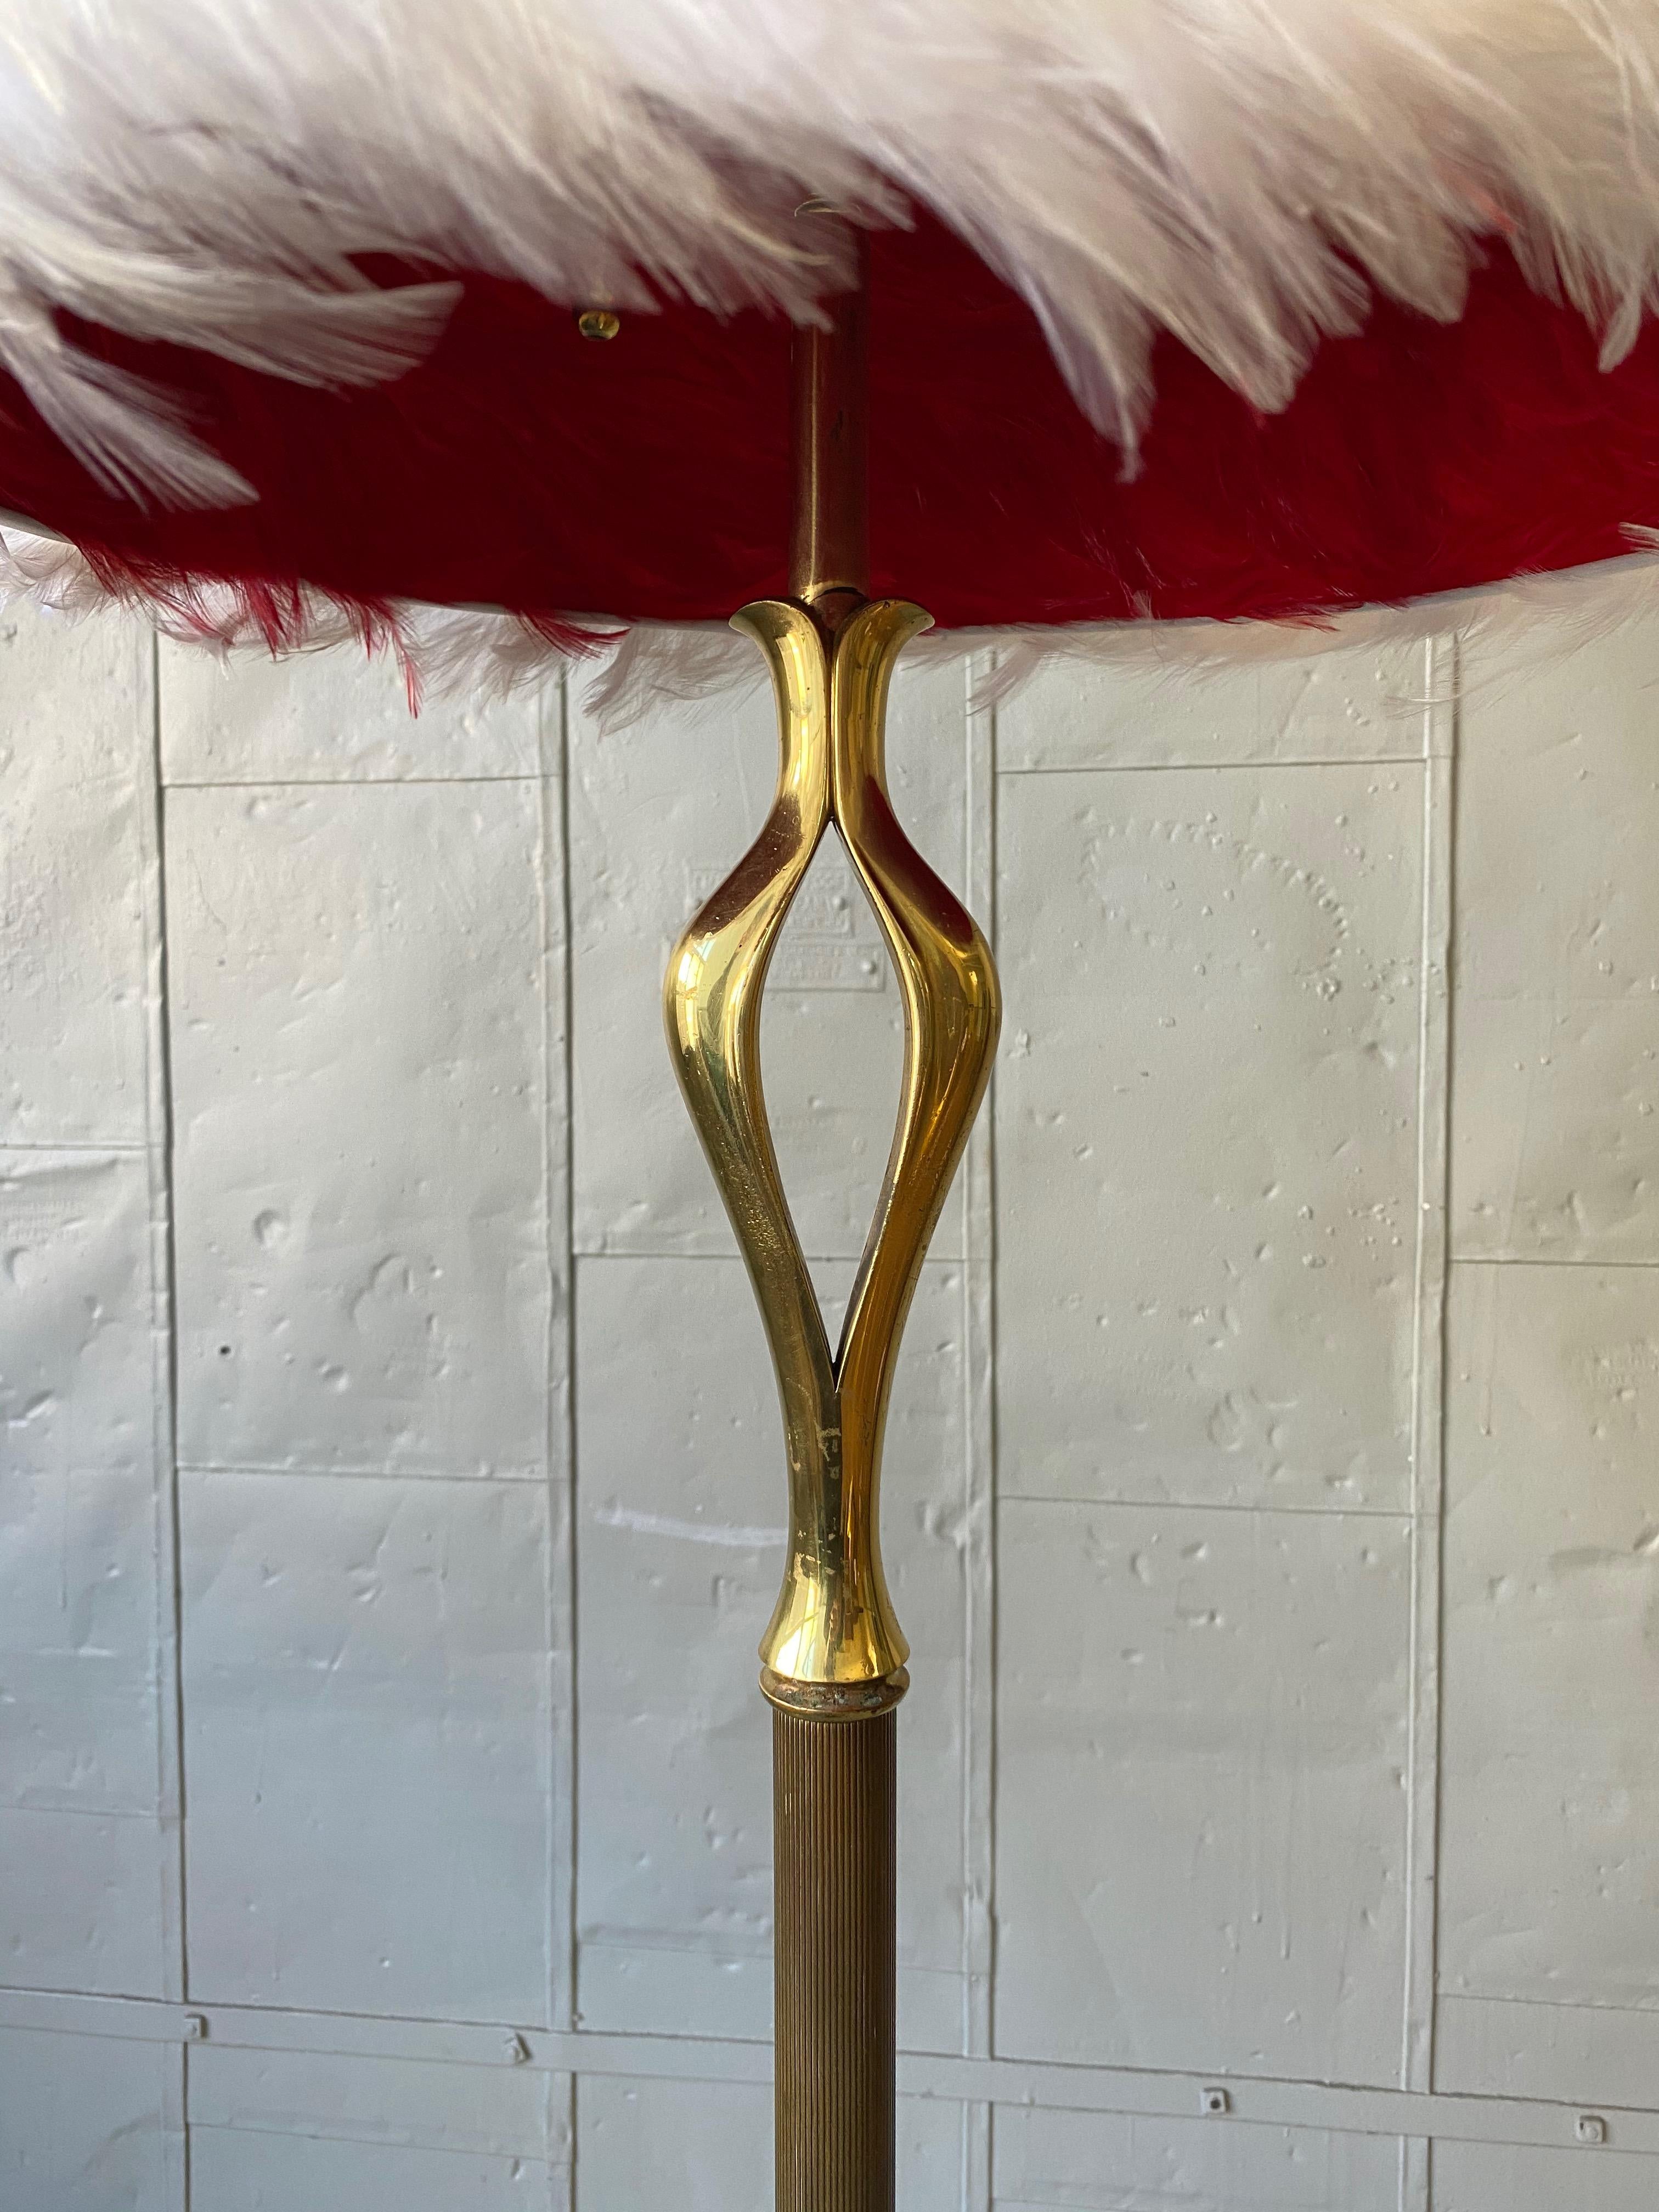 Mid-20th Century French Mid-Century Modern Brass Floor Lamp on a Tripod Base For Sale